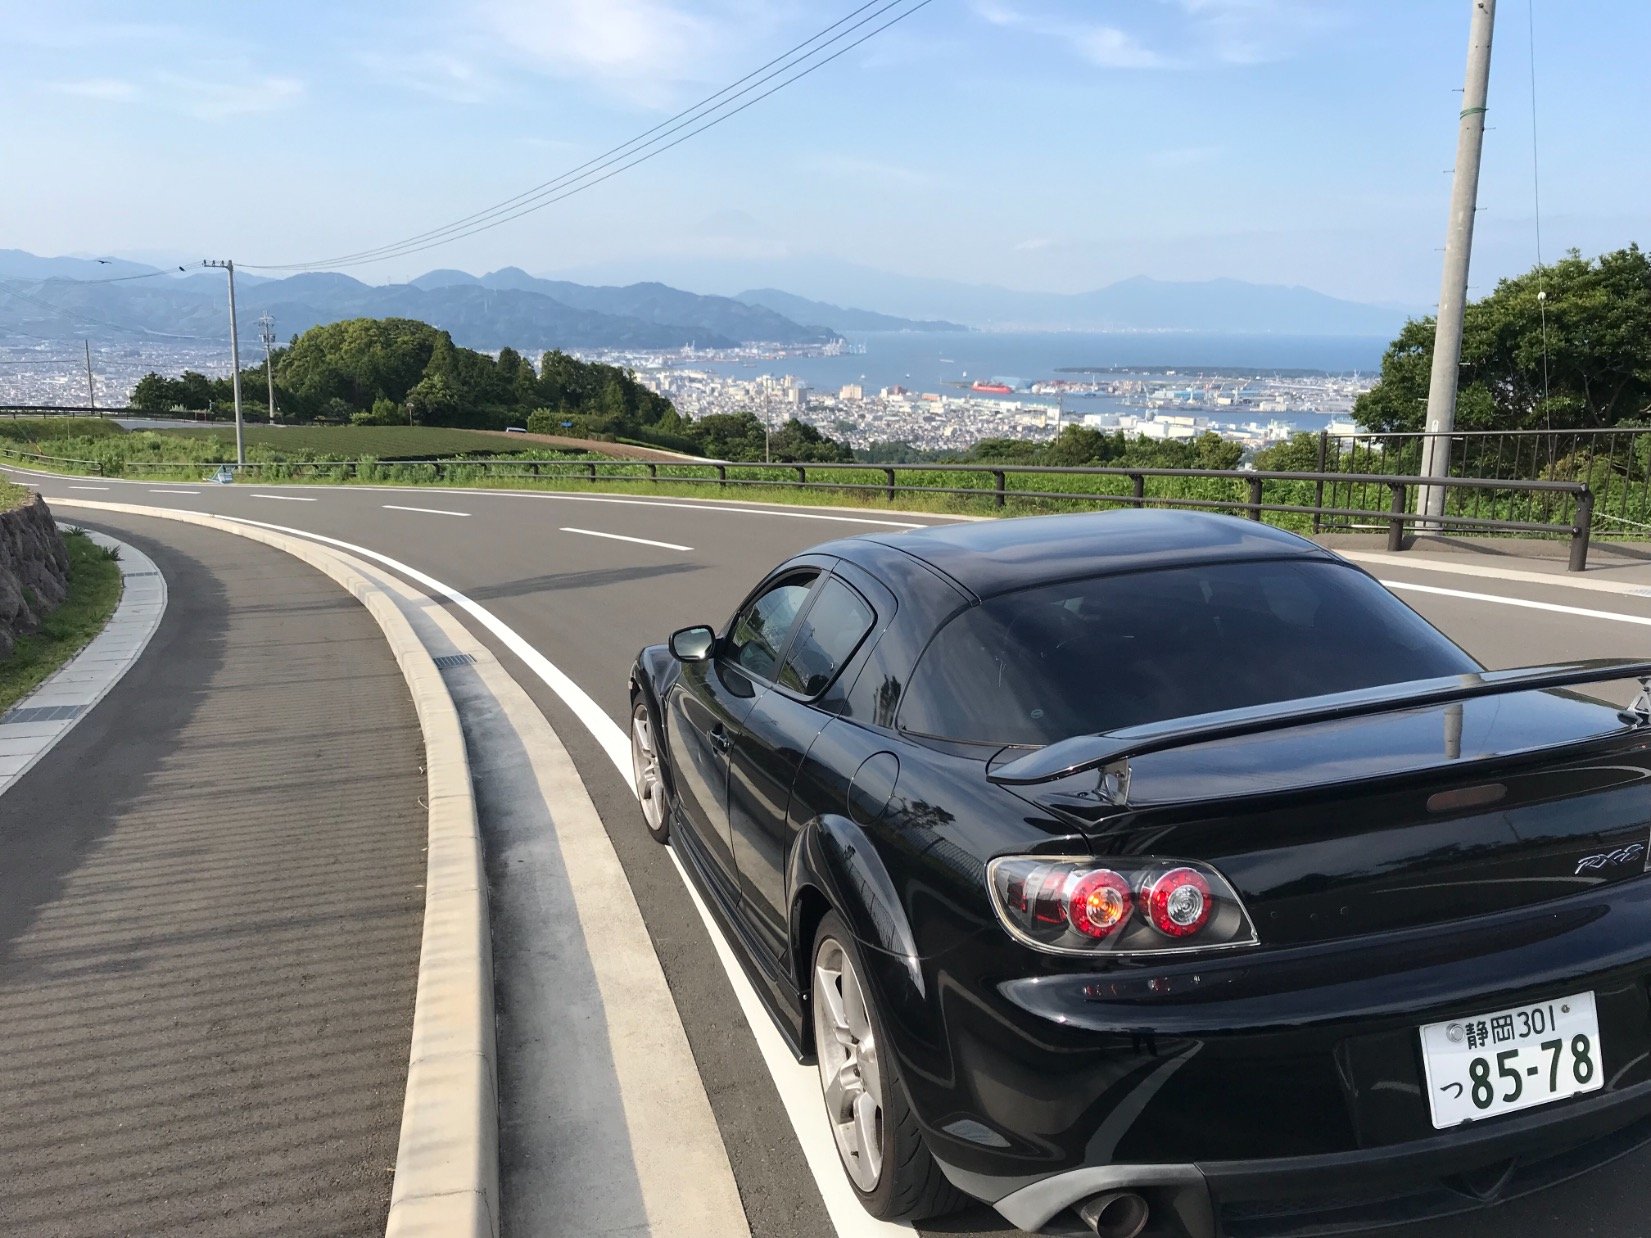 RX-8 Type-S 黒マツスピエアロ/ SE-3P /ど初期型のエイトで関東から中部のサーキット走り回ってます/ FSW /SLY/ ALT /MLM/ SNMP/ 日本平 /無言フォロー失礼